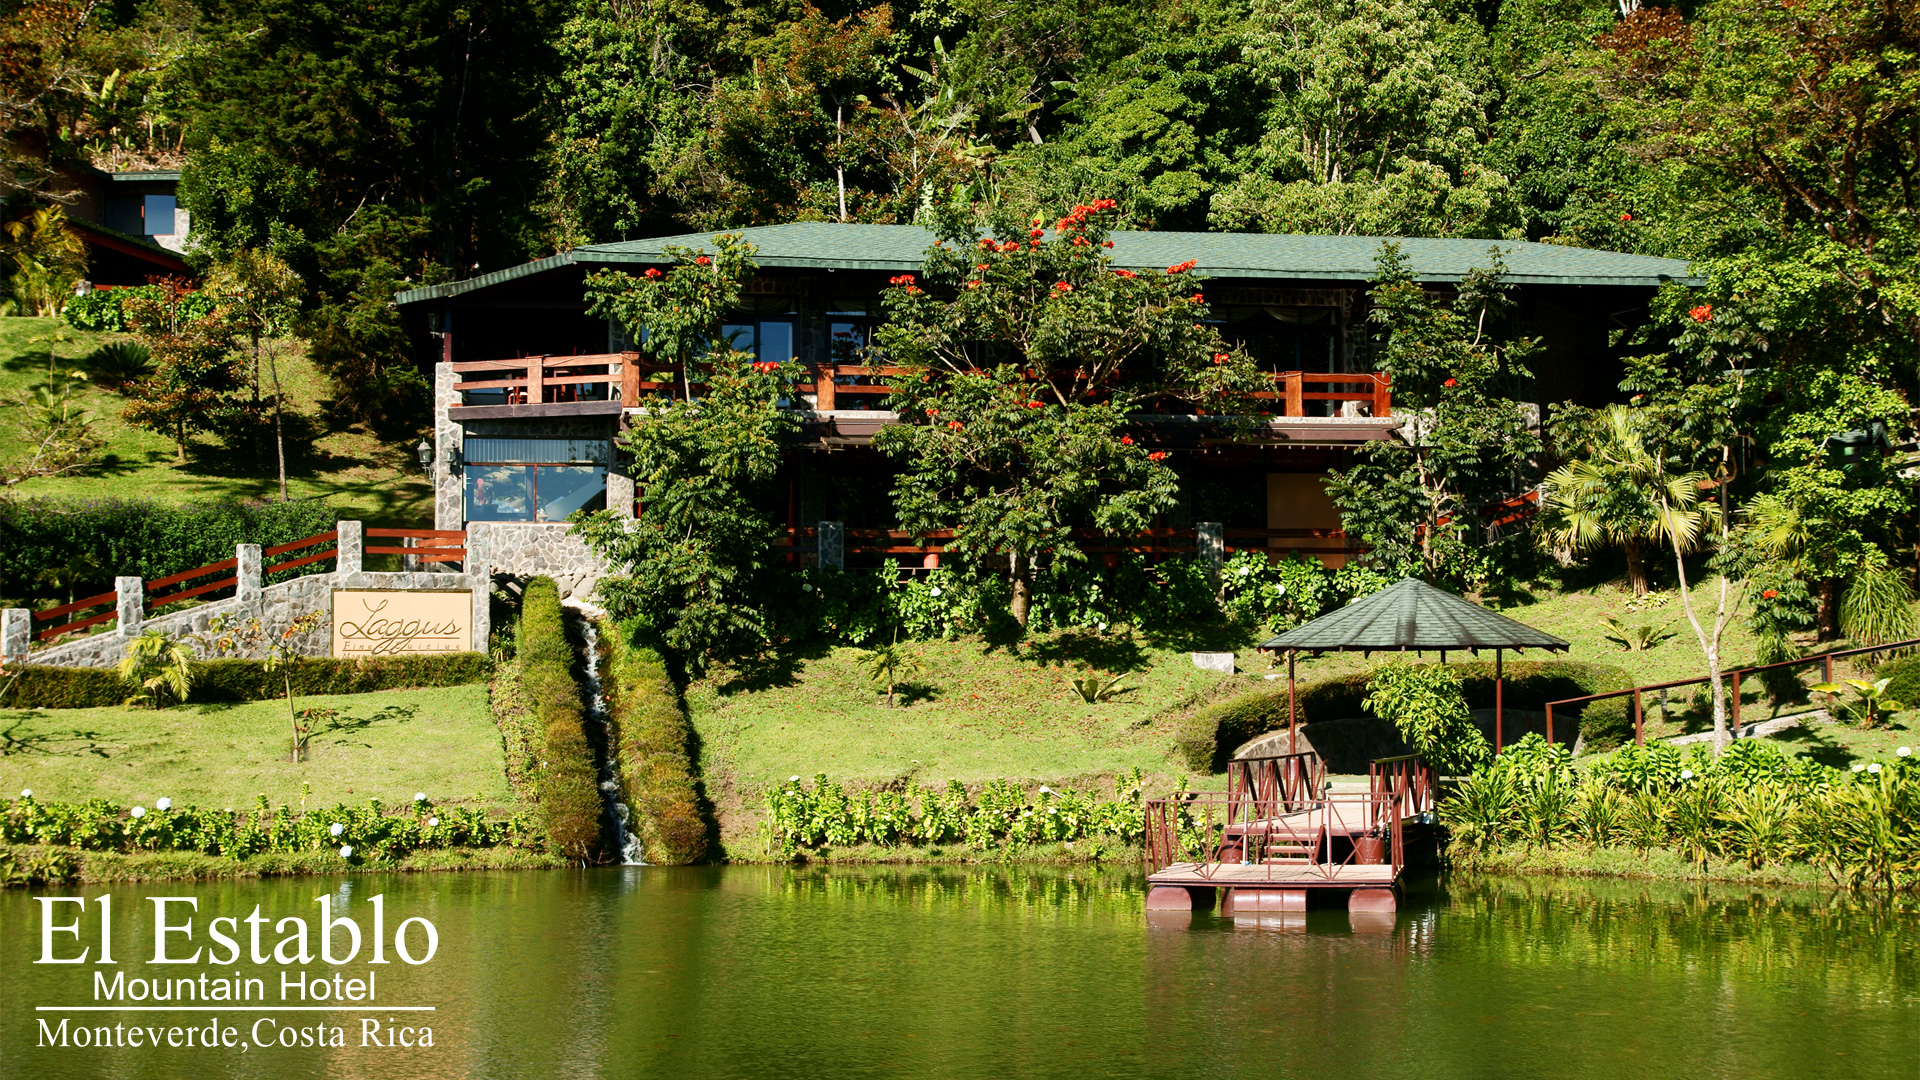 Stay at El Establo Mountain Hotel, a remarkable retreat in the enchanting cloud forests.